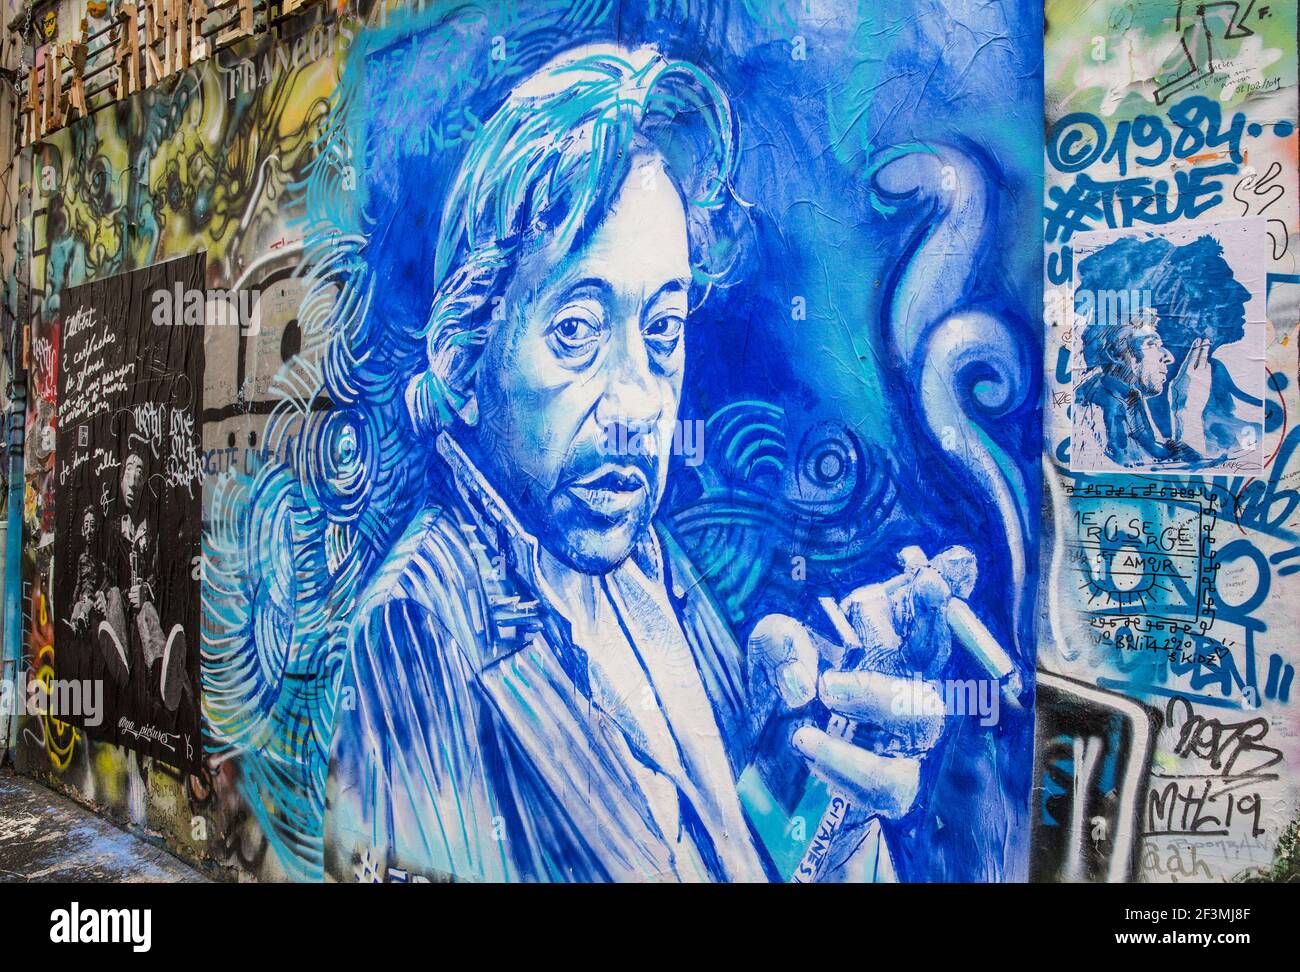 THE FRENCH PAINTER ERNESTO NOVO PAINTED A PORTRAIT OF SERGE GAINSBOURG ON THE WALL IN FRONT OF HIS HOUSE IN PARIS Stock Photo